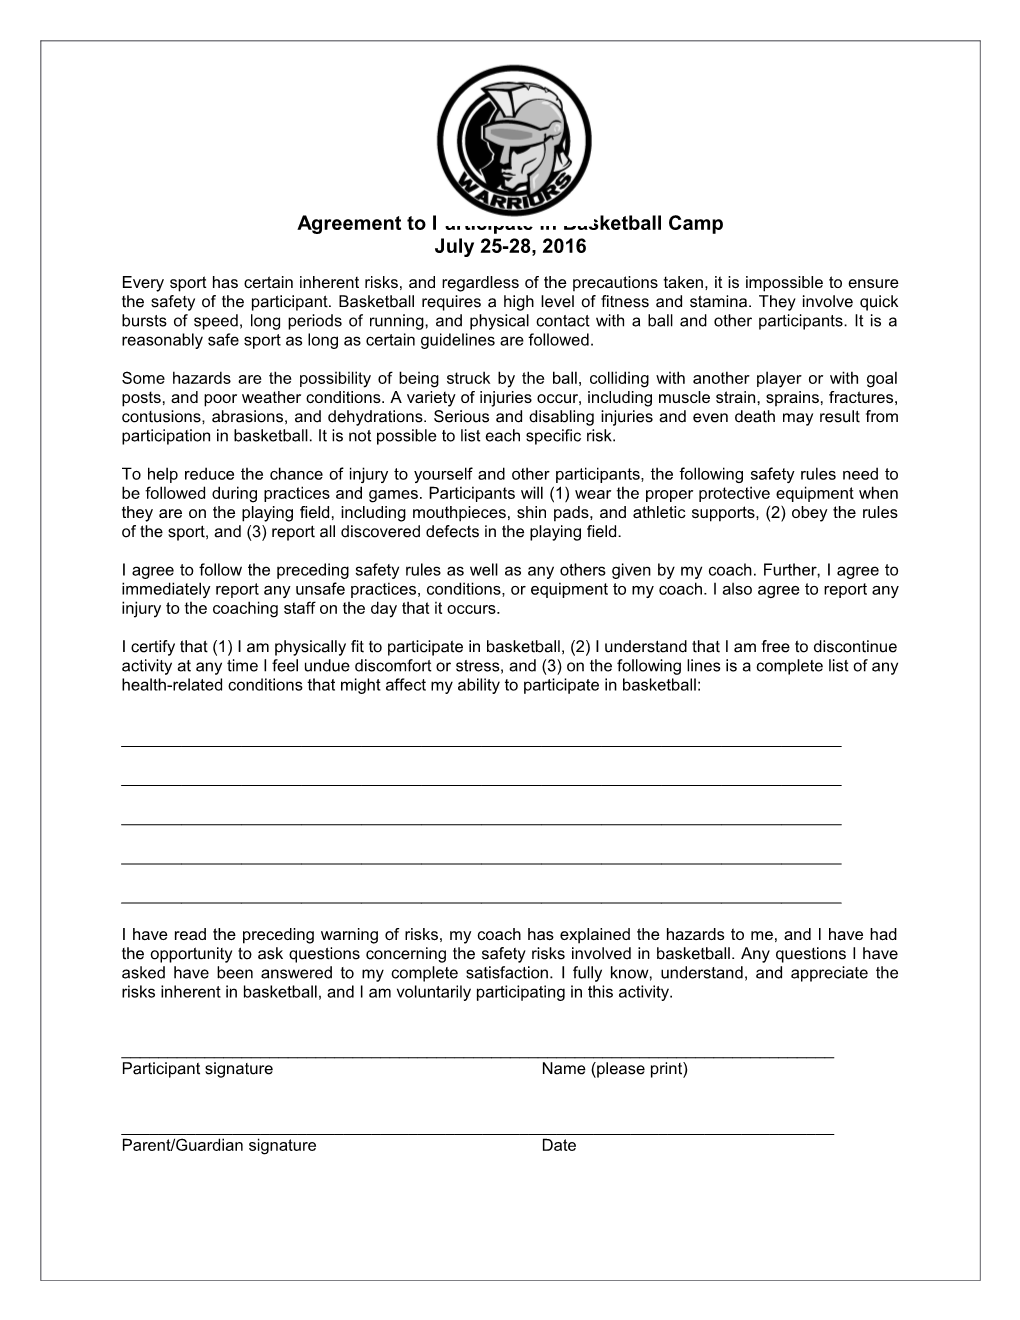 Sample Agreement to Participate Form